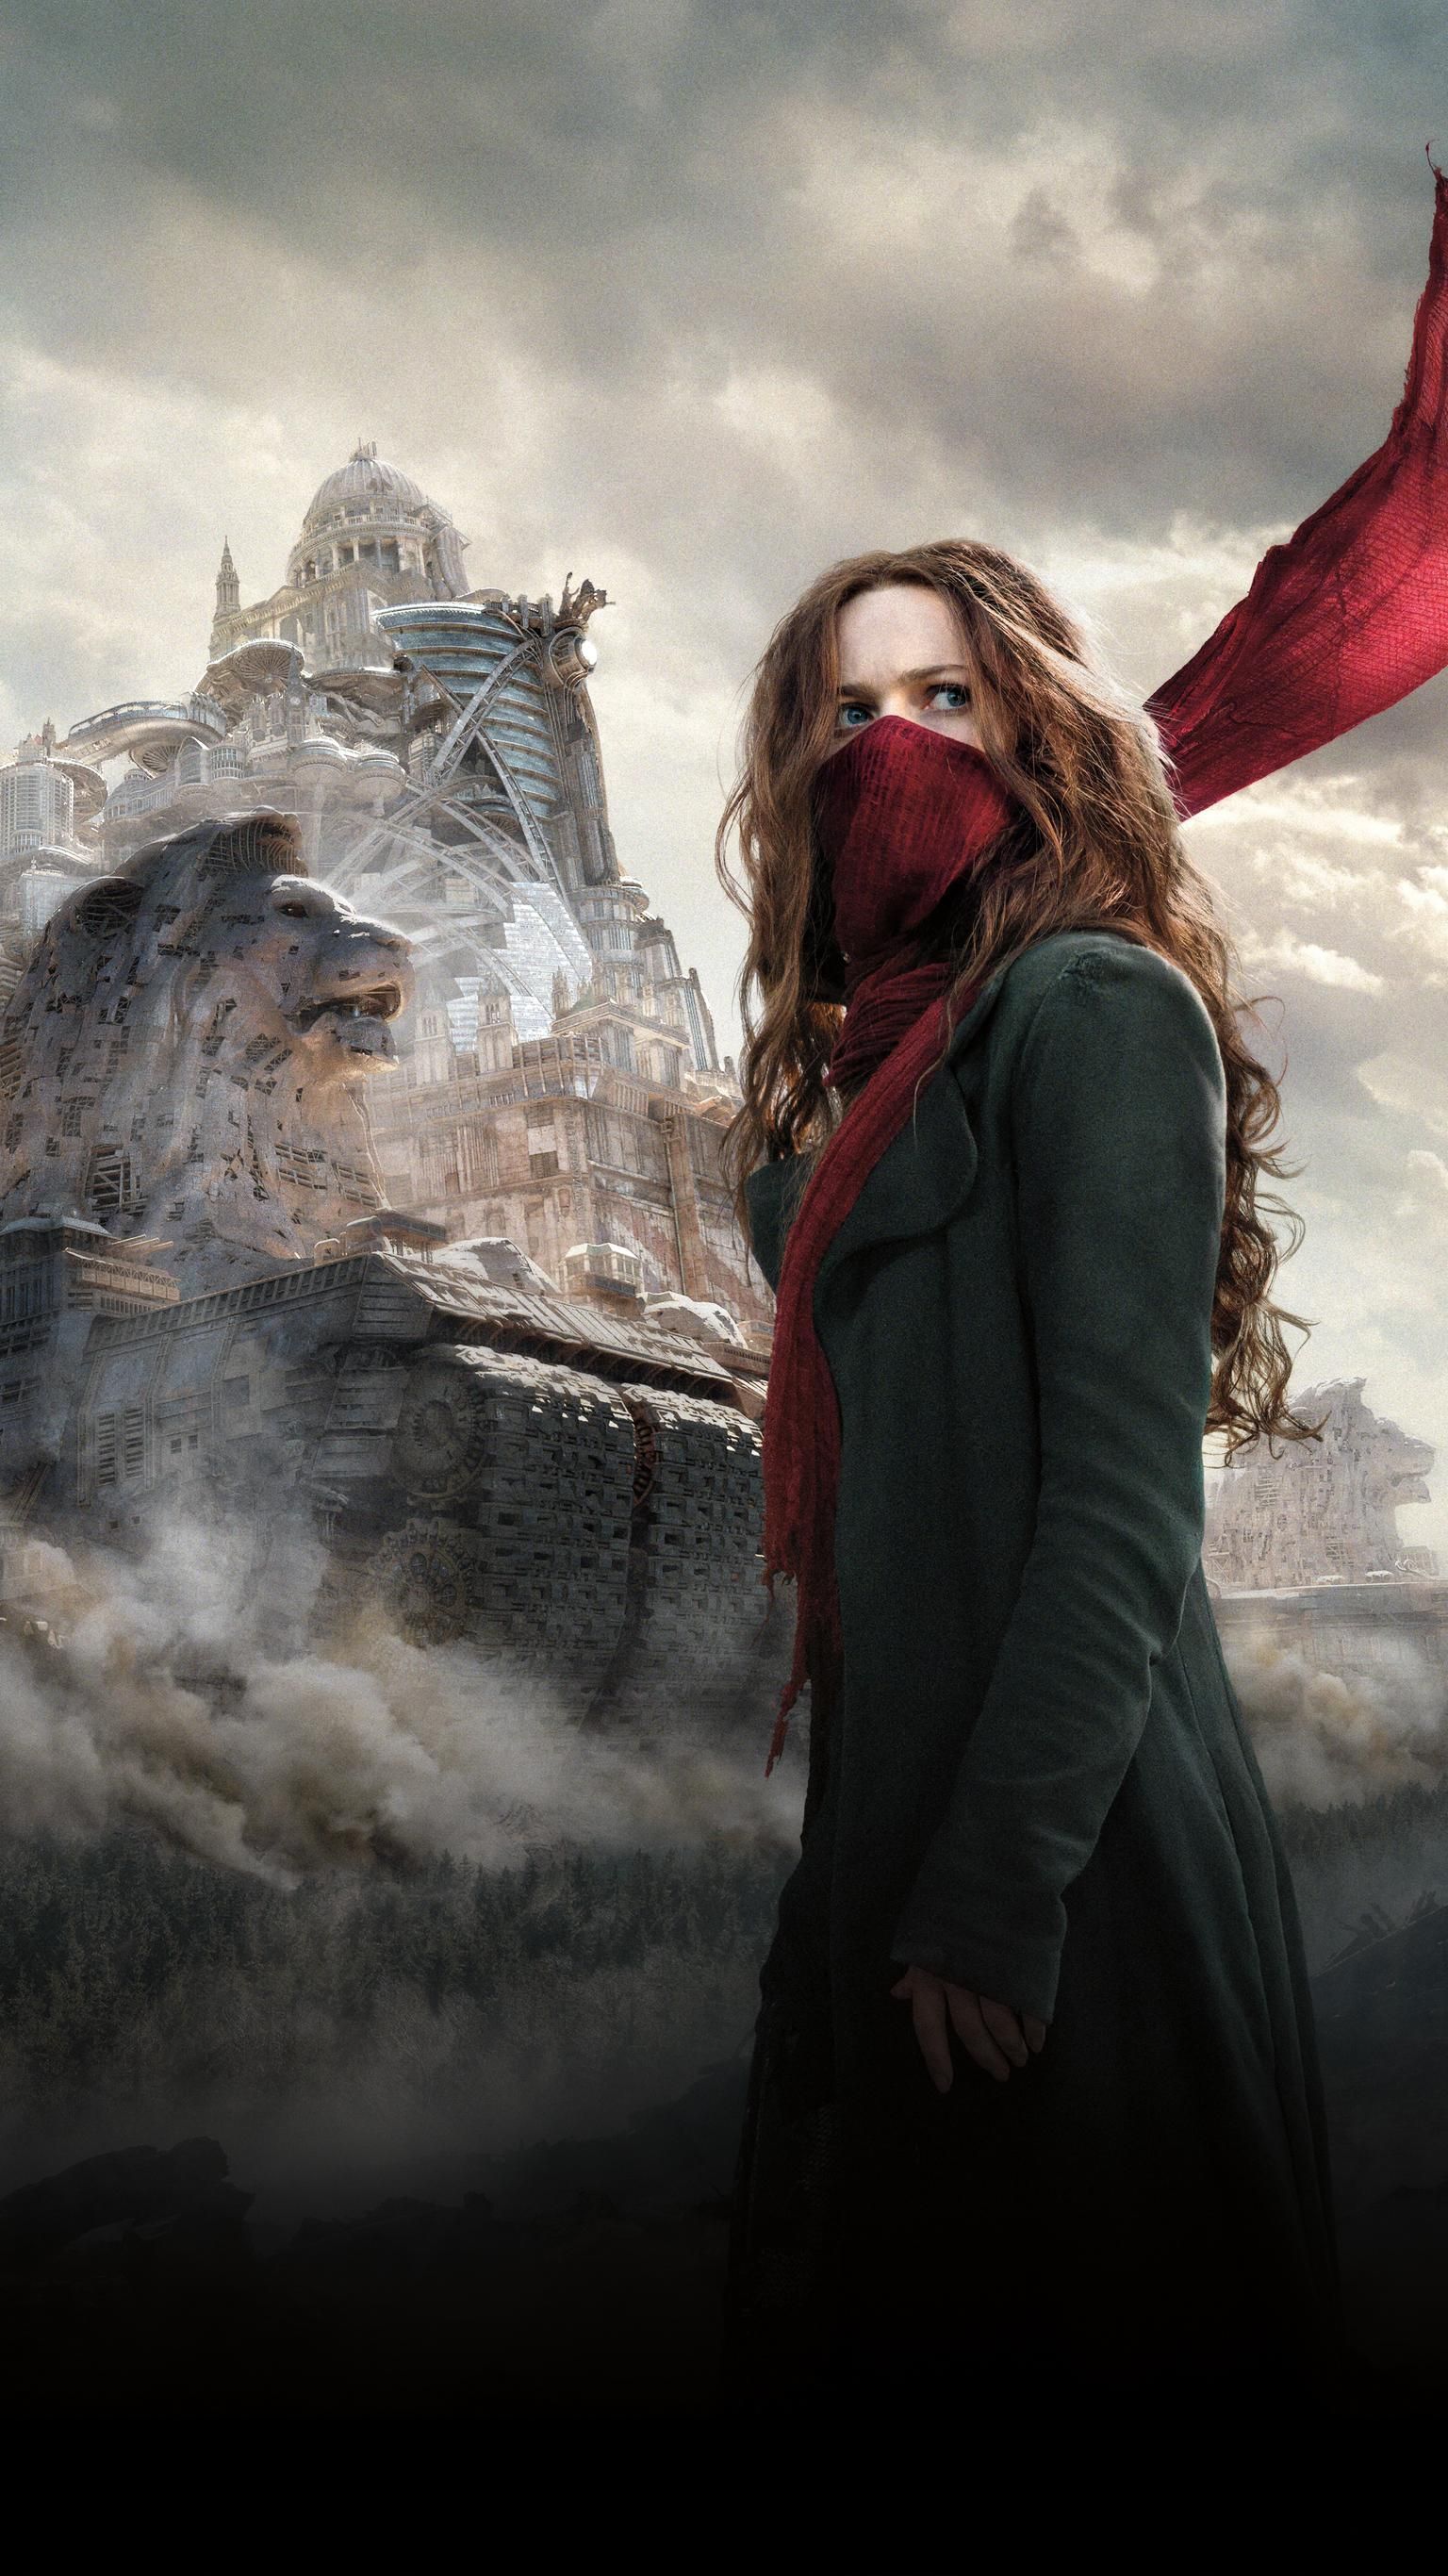 Mortal Engines (2018) Phone Wallpaper. Mortal engines, Full movies online free, Free movies online